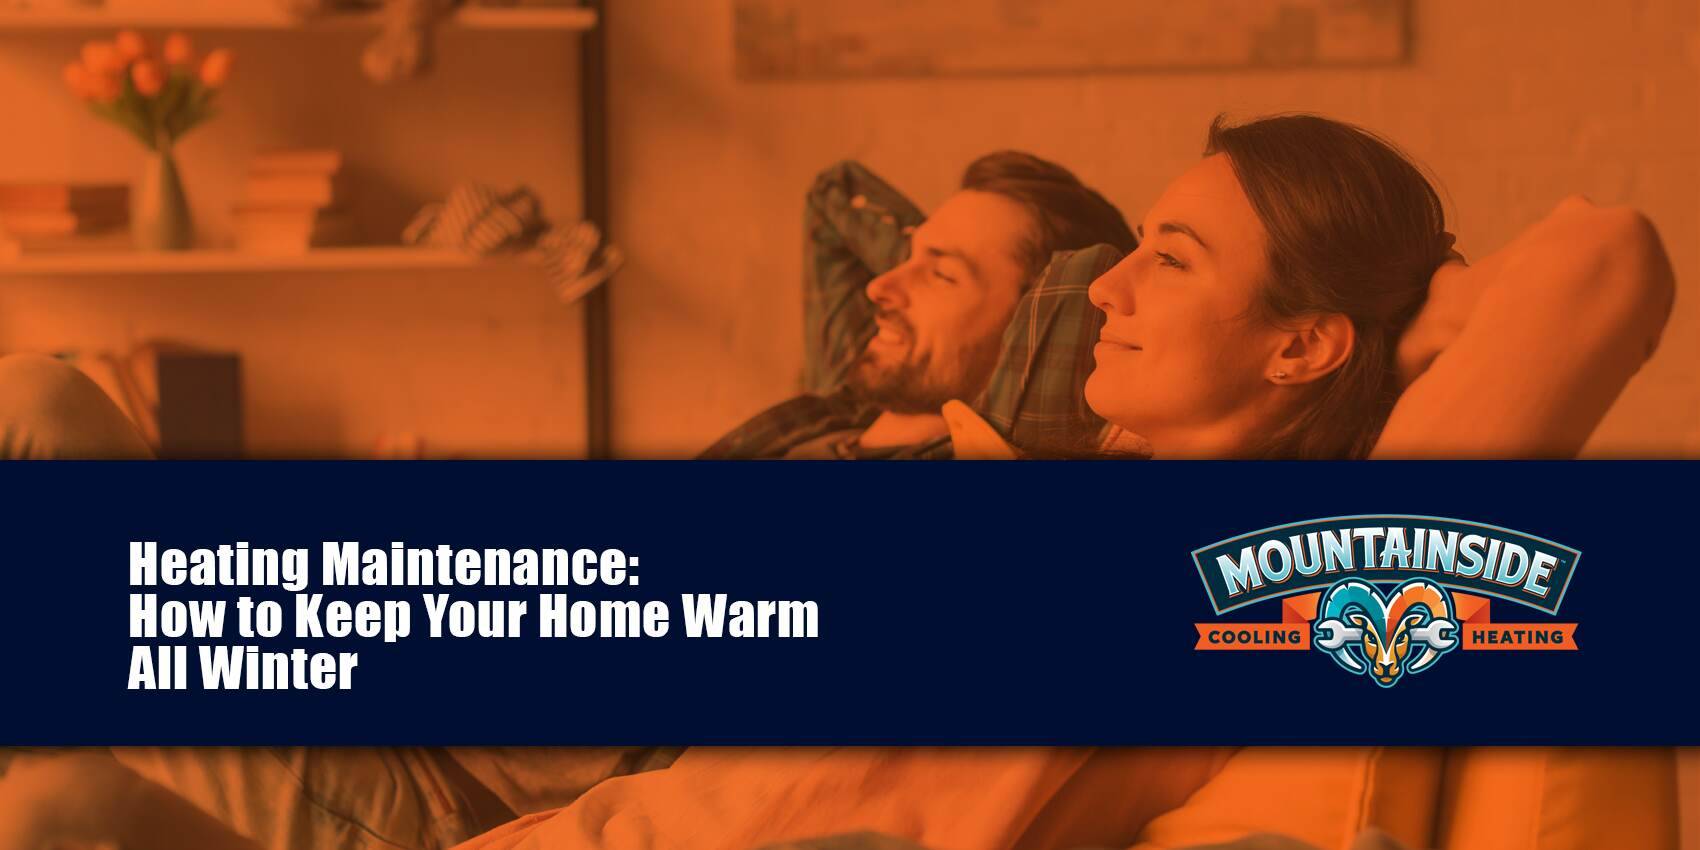 heating maintenance: how to keep your home warm all winter blog title with happy couple photo and mountainside logo image